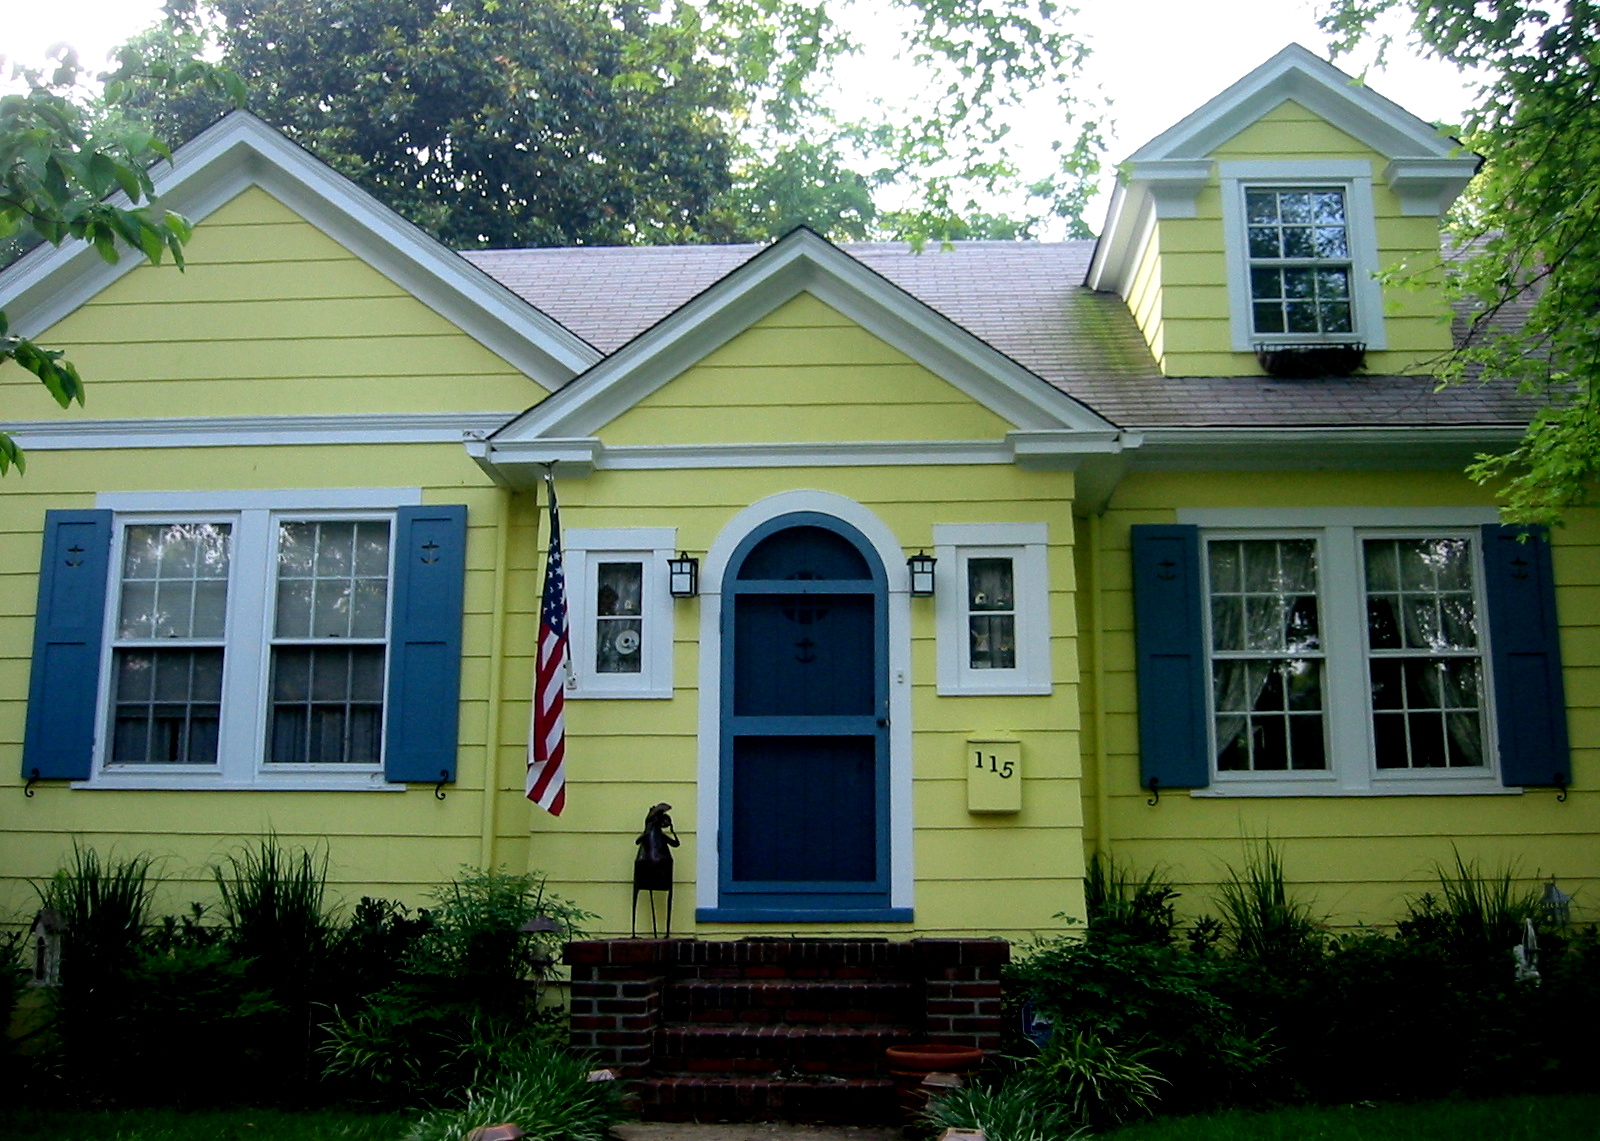 Yellow house, blue shutters, Homewood | Flickr - Photo Sharing!